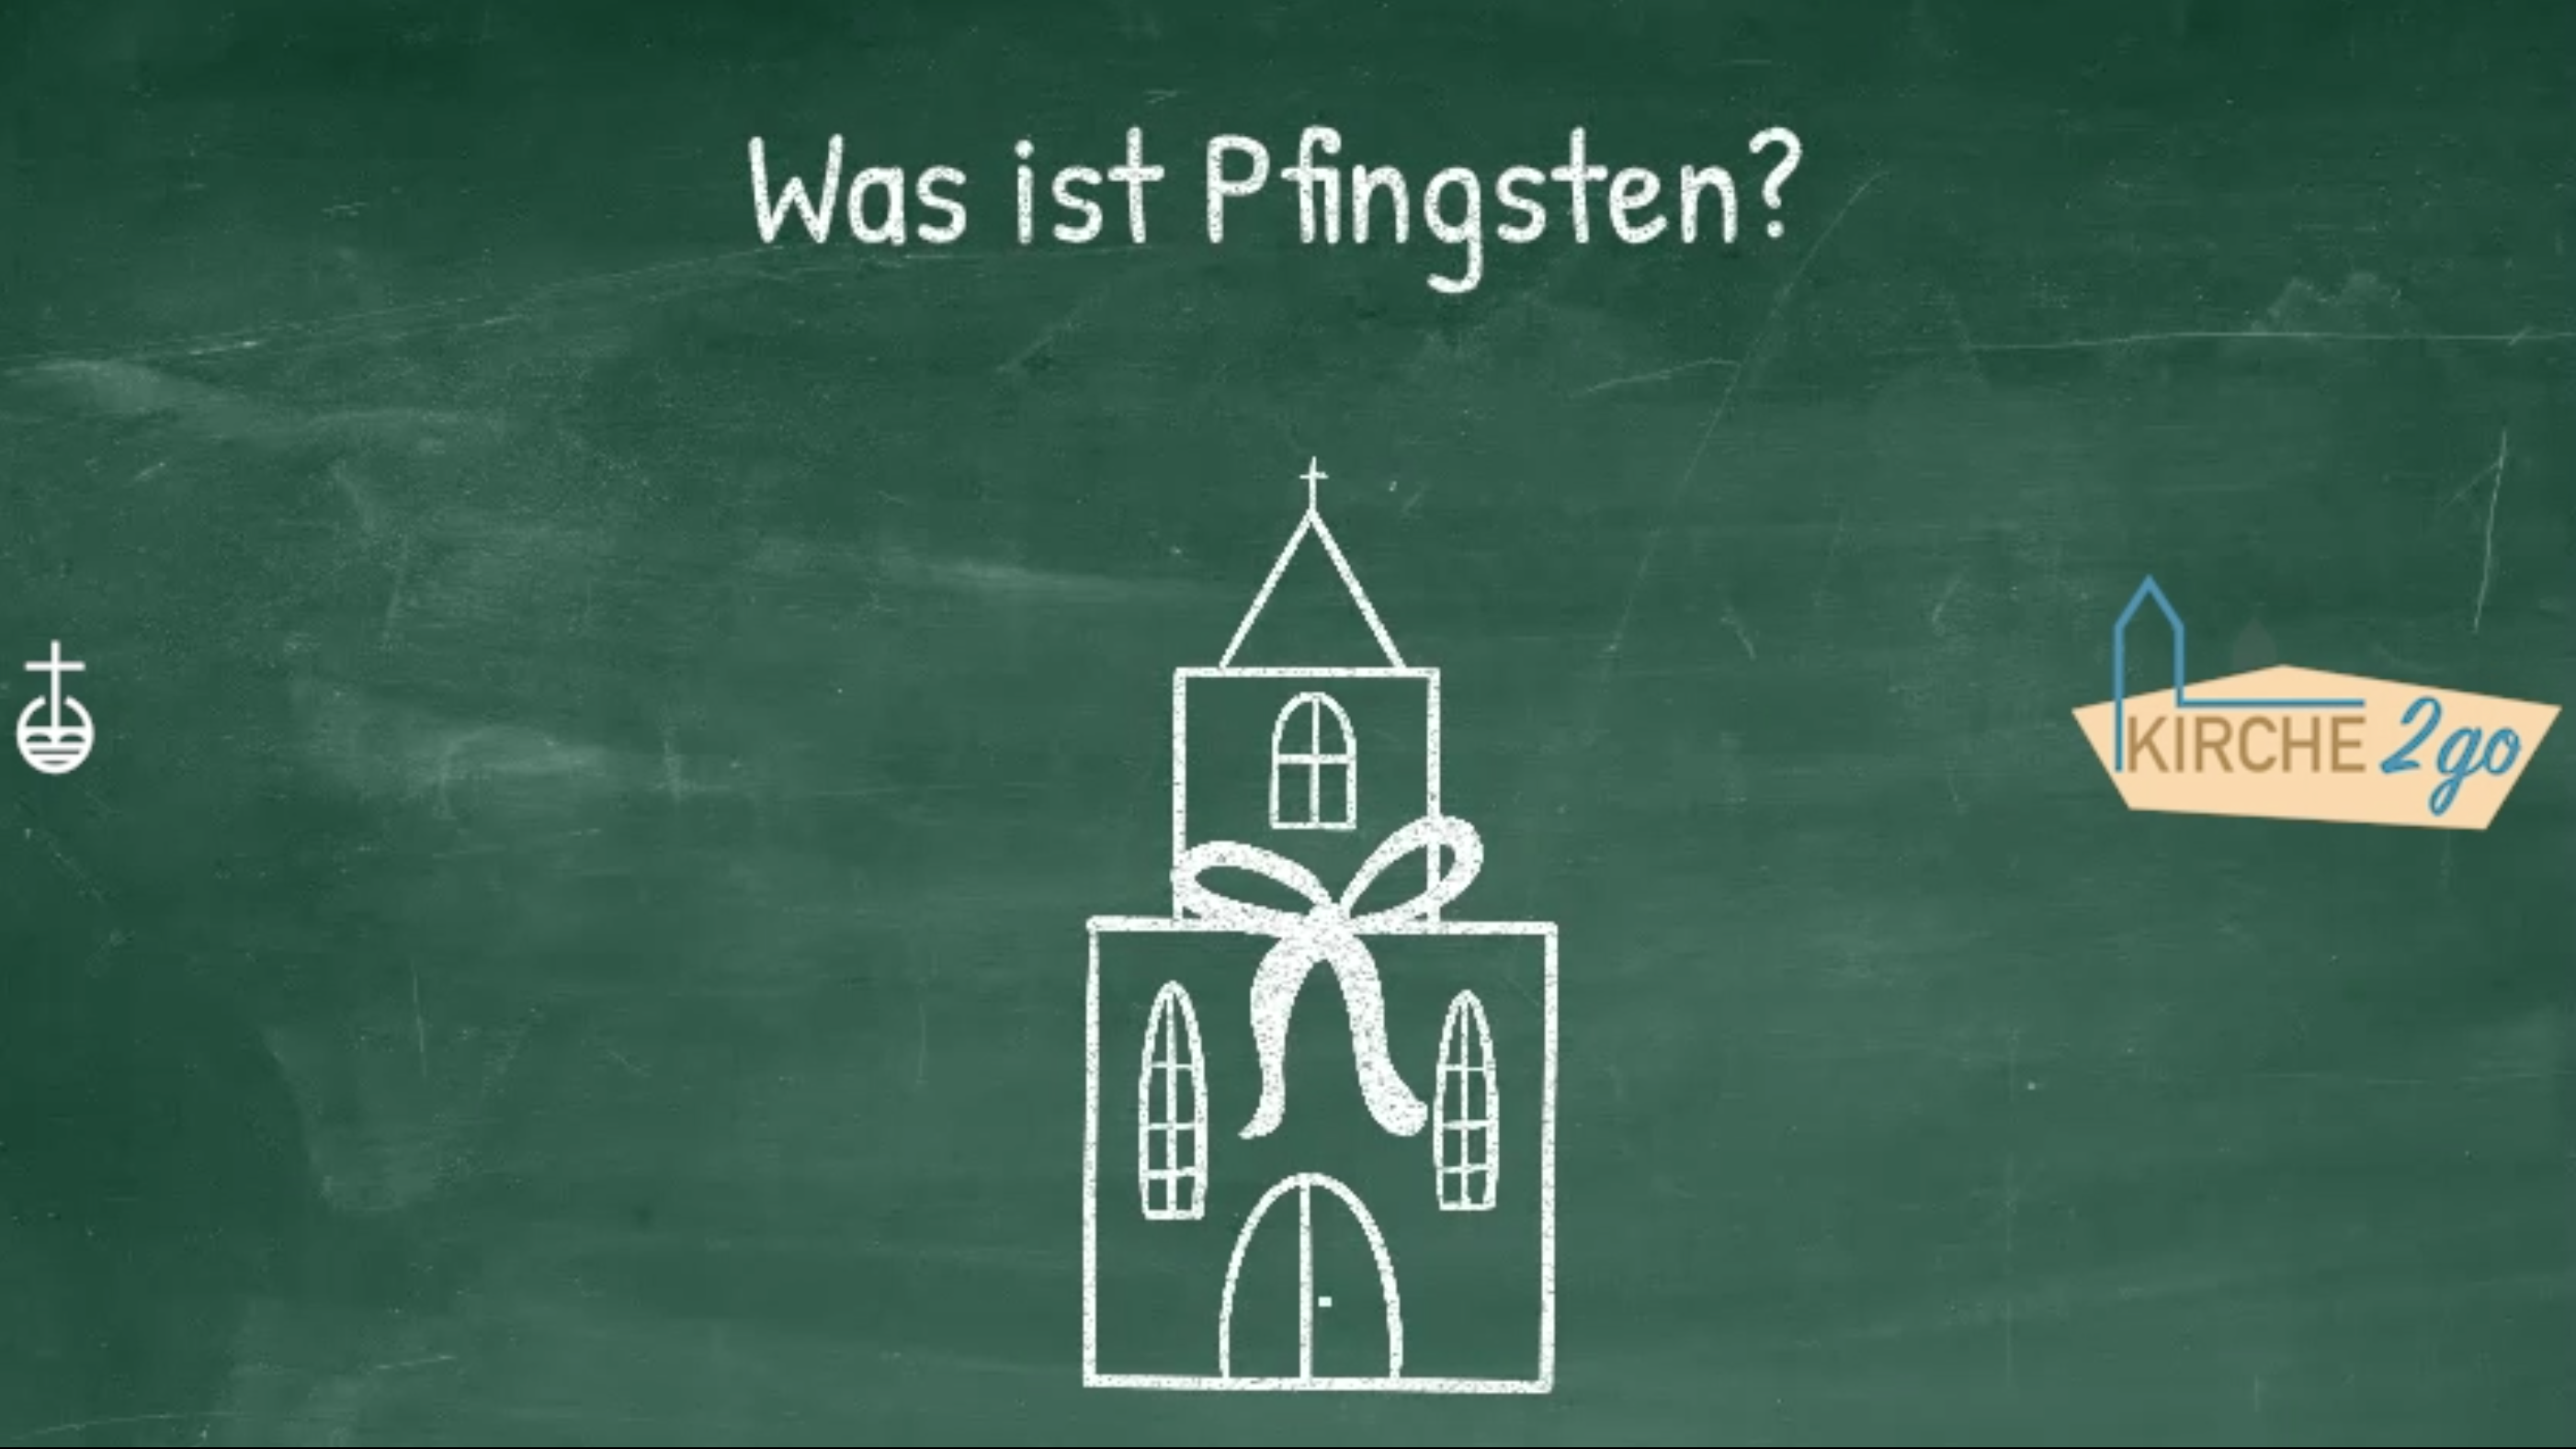 You are currently viewing Kirche2go fragt: Was ist Pfingsten?